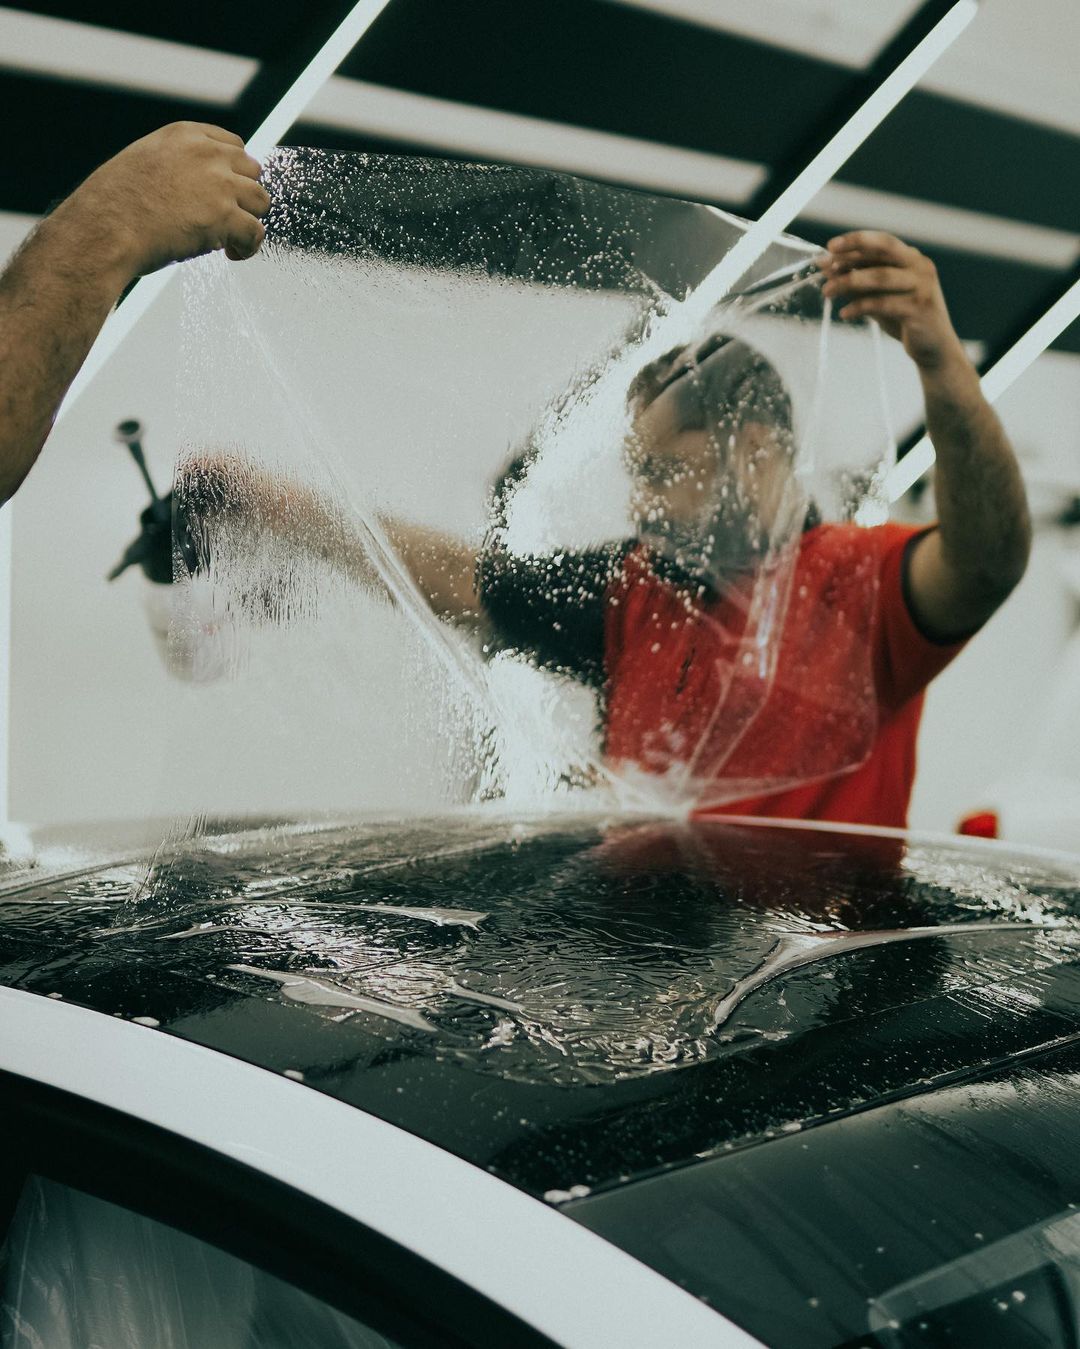 Everything you need to know before applying paint protection film in Dubai